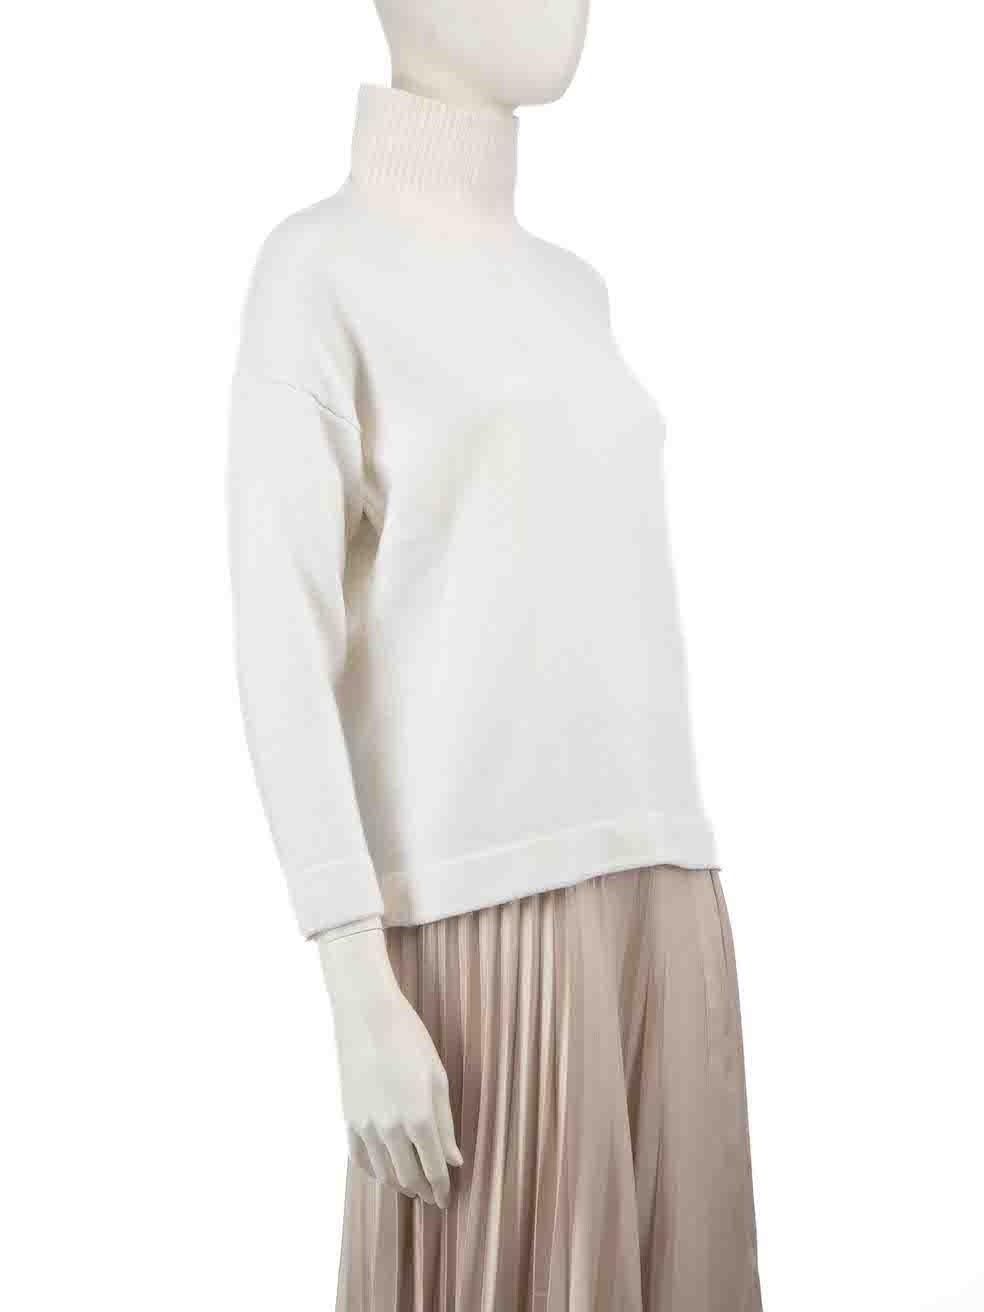 CONDITION is Very good. Minimal wear to jumper is evident. Minimal wear to the texture with light pilling to the knit on this used Max Mara designer resale item.
 
 
 
 
 White
 
 Wool
 
 Knit jumper
 
 Turtleneck
 
 Long sleeves
 
 Cropped fit
 
 
